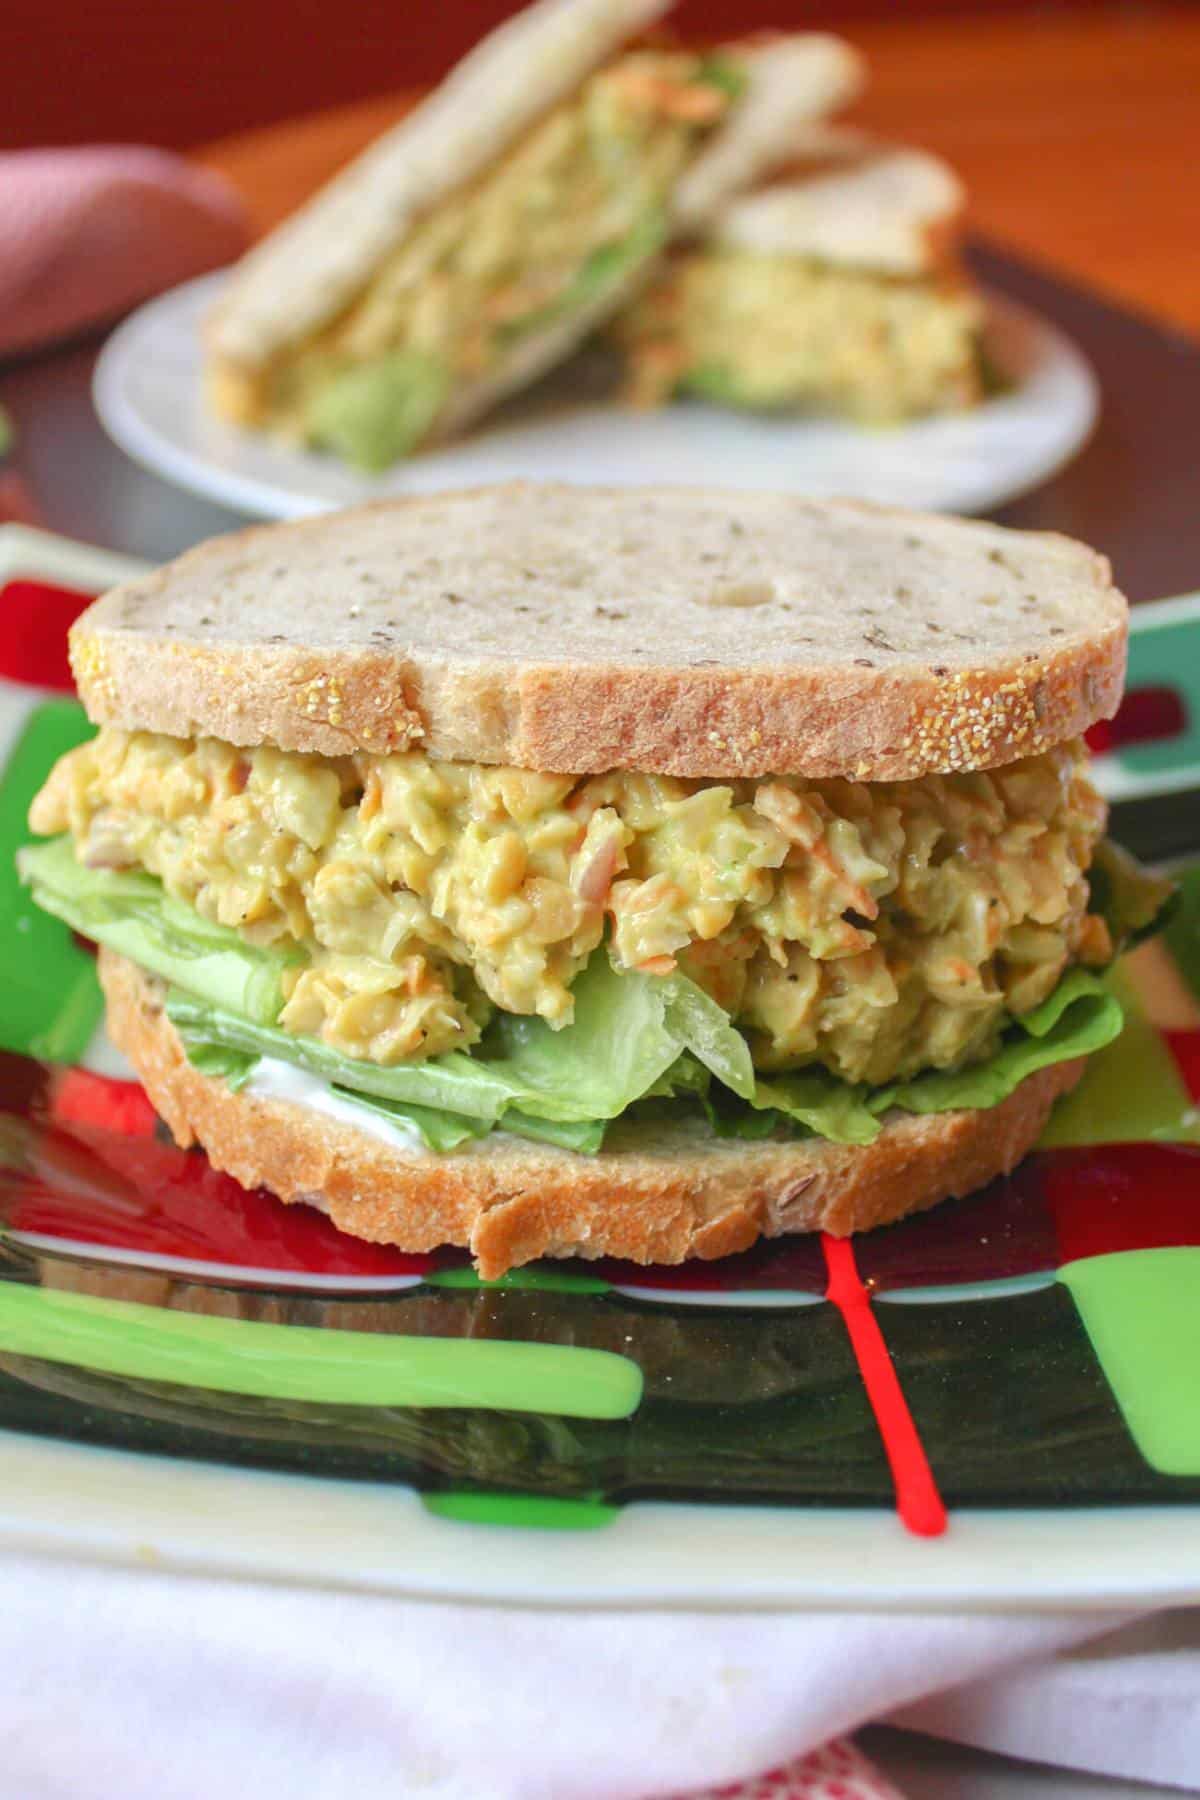 Chickpea salad sandwich on a plate with lettuce.